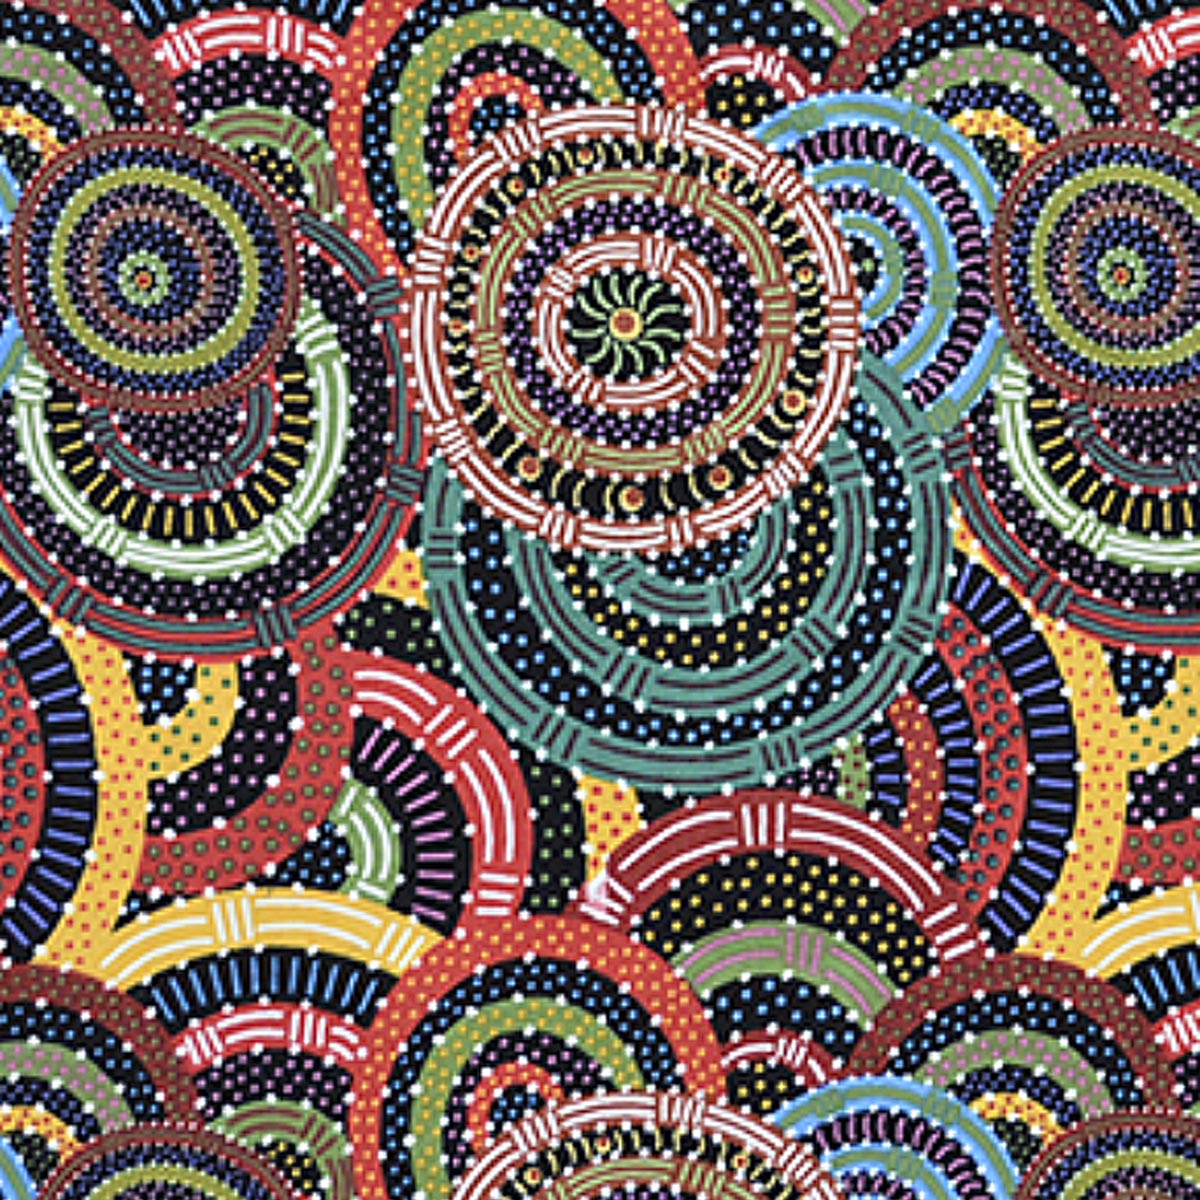 WOMEN'S BODY DREAMING BLACK by Aboriginal Artist CINDY WALLACE